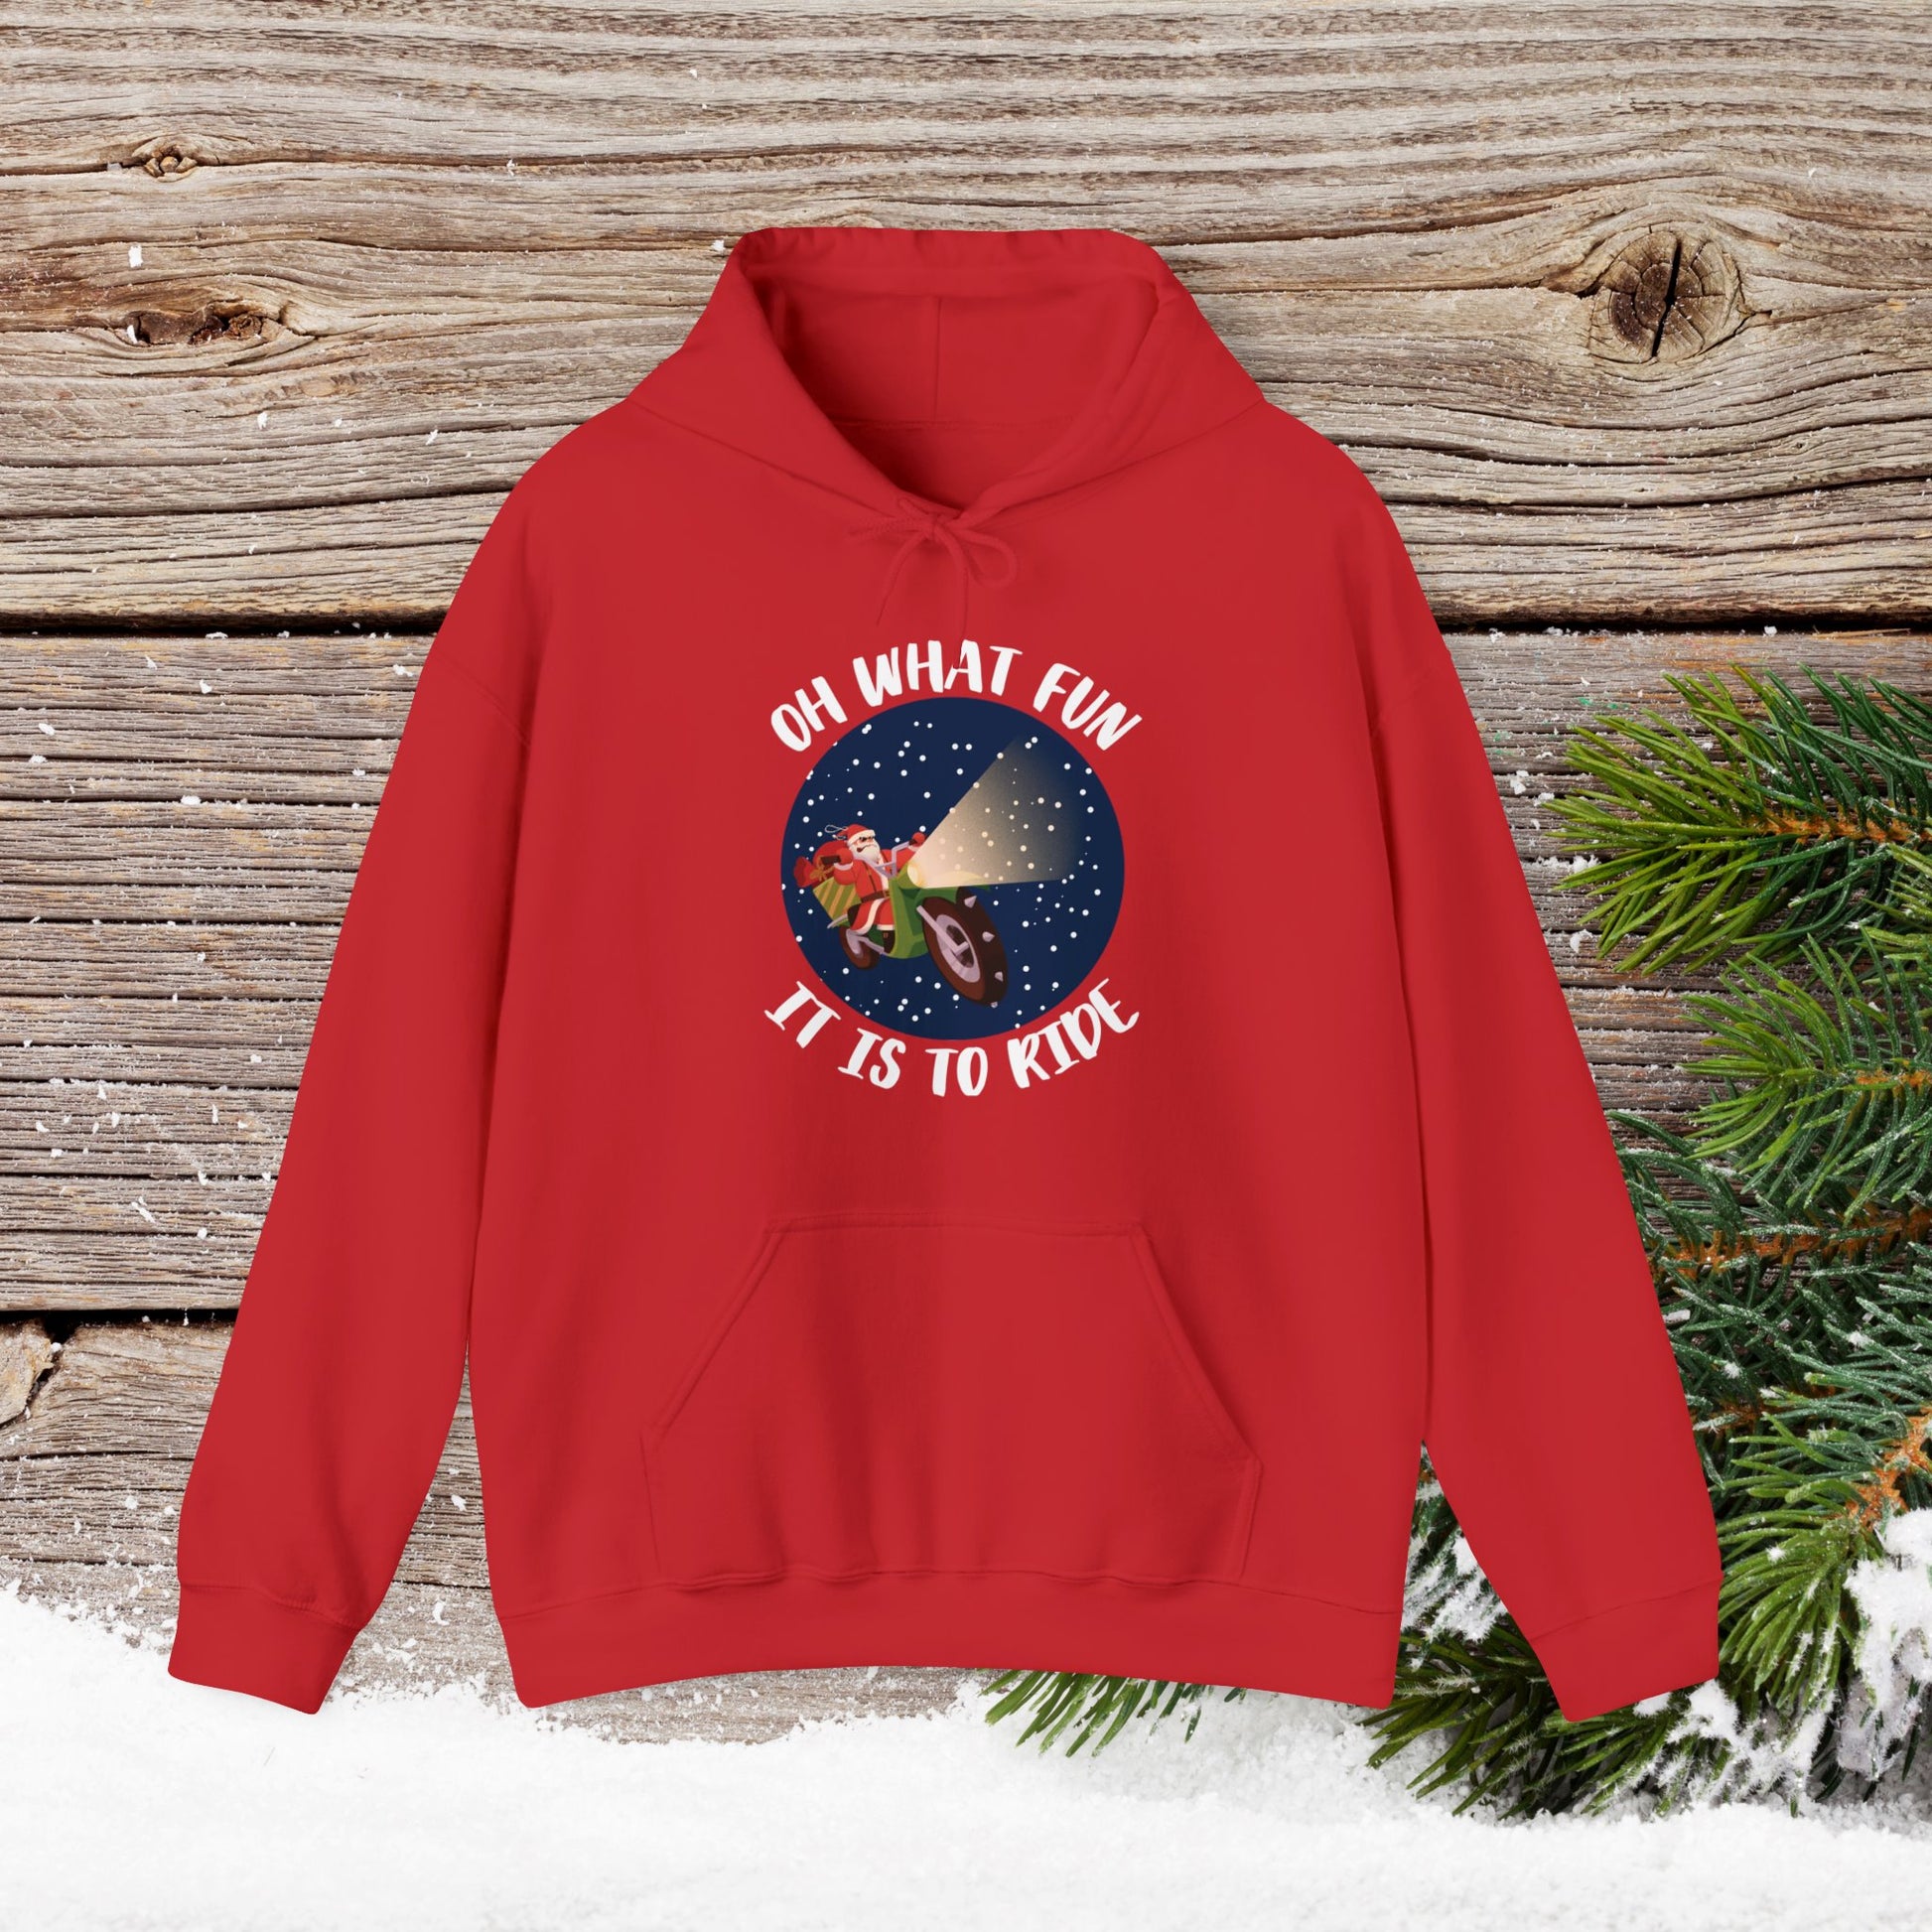 Christmas Hoodie - Oh What Fun It Is To Ride - Mens and Boys Christmas Shirts - Youth and Adult Christmas Hooded Sweatshirt Hooded Sweatshirt Graphic Avenue Red Adult Small 